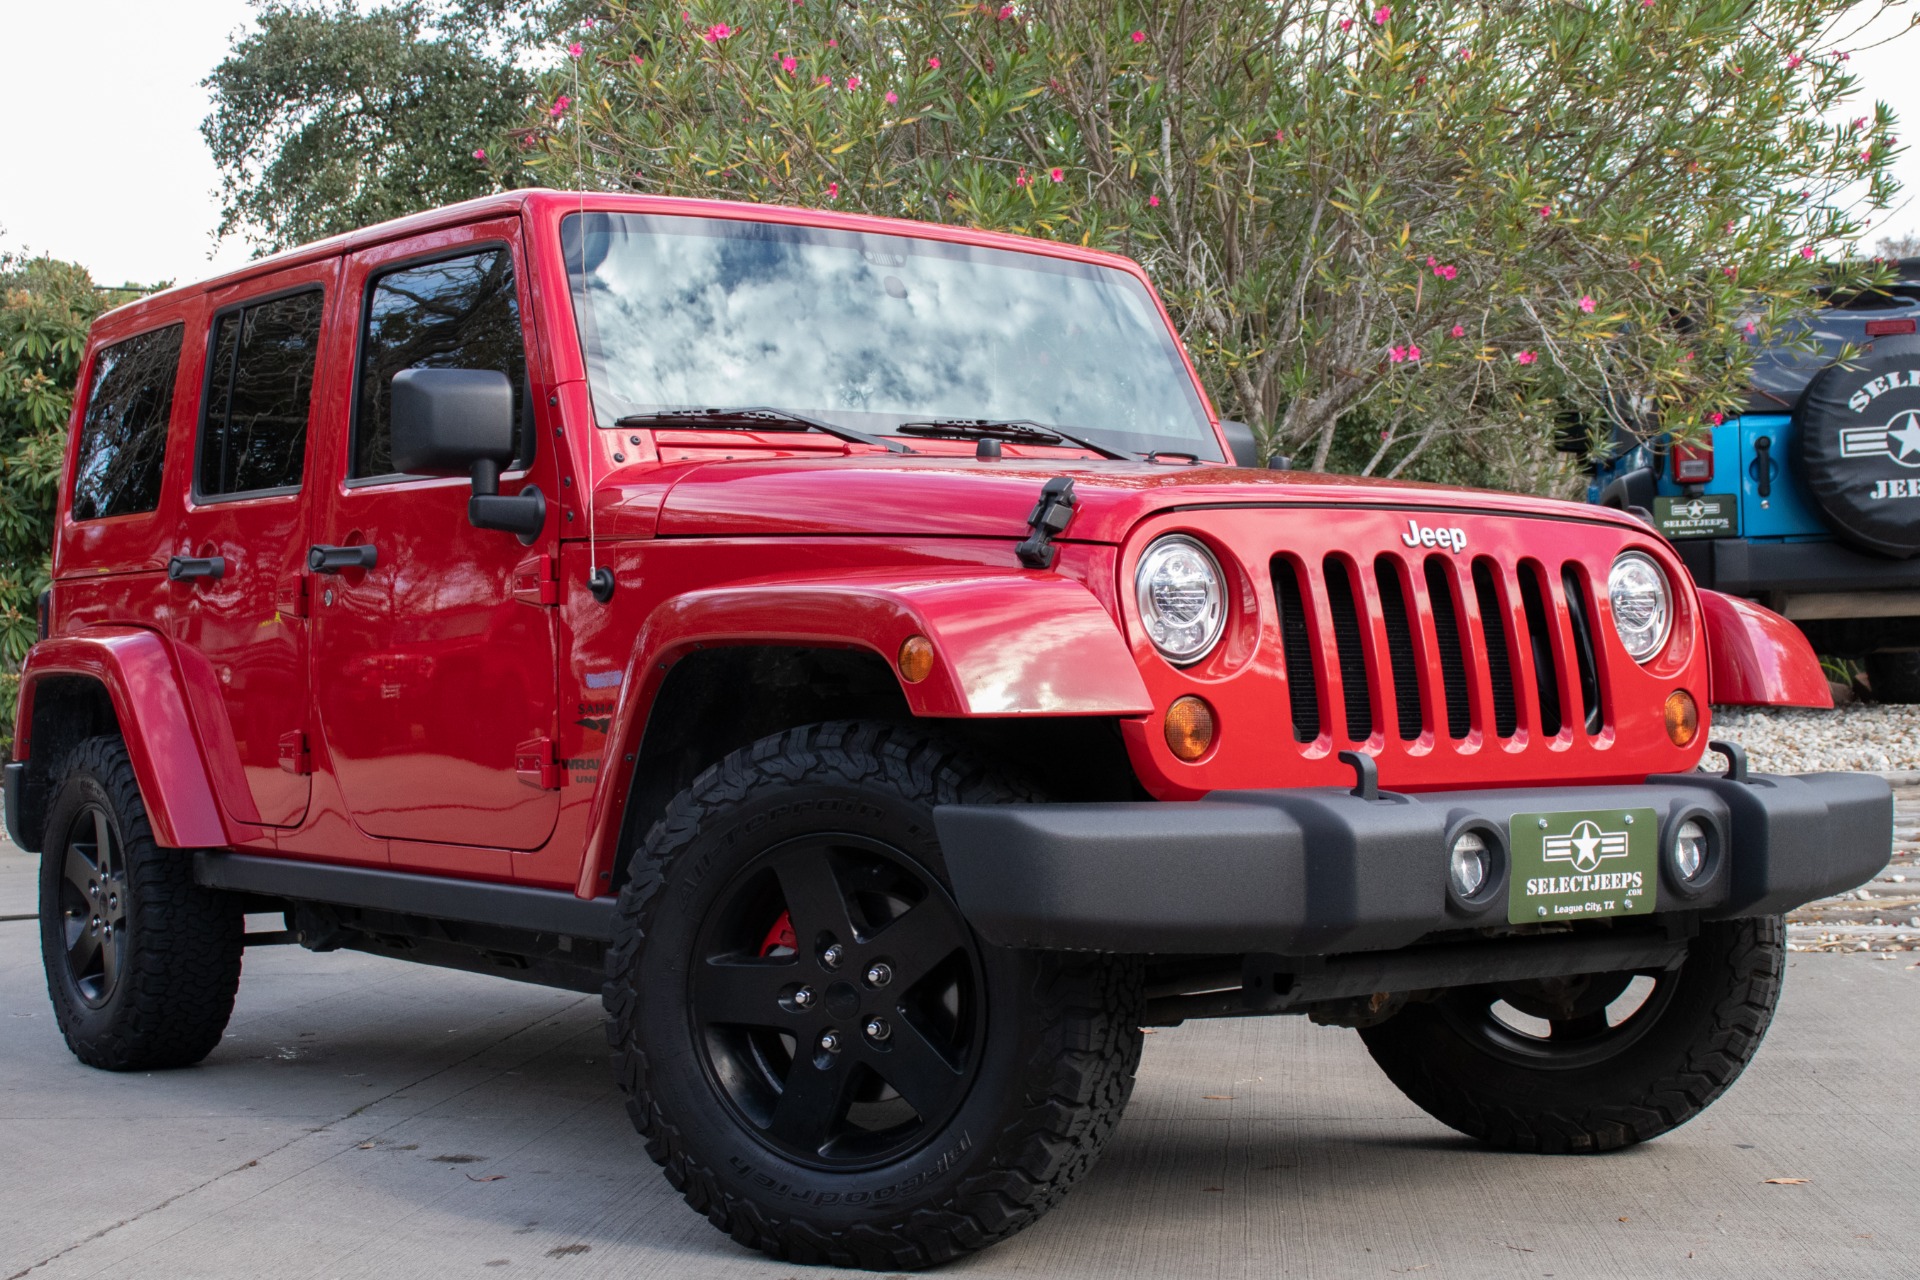 Used 2011 Jeep Wrangler Unlimited Sahara For Sale 21 688